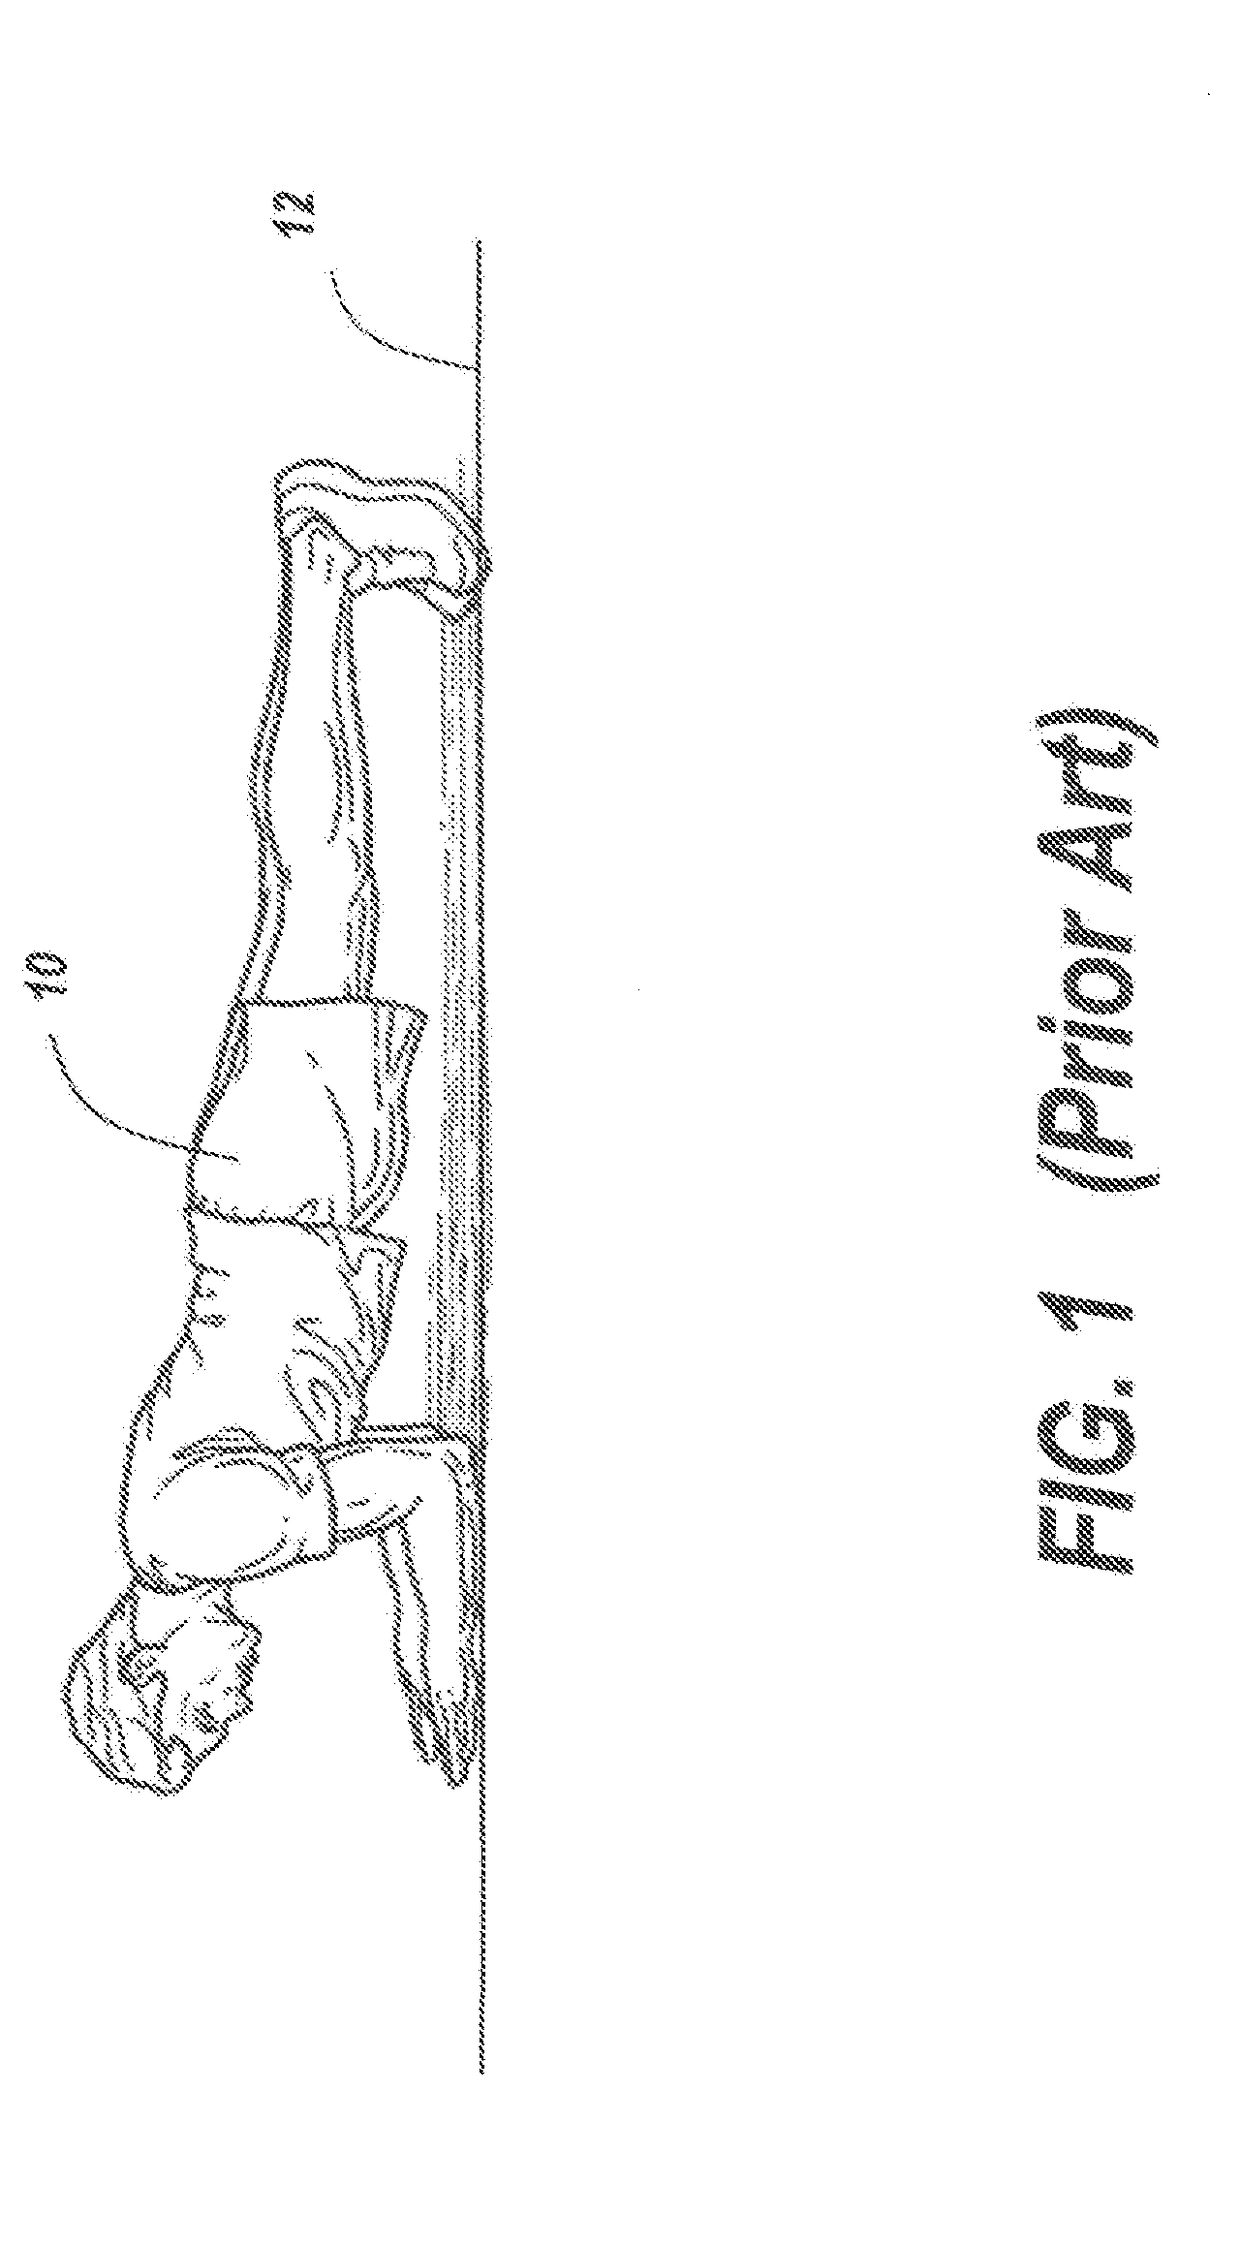 Plank Support Exercise Apparatus and Related Methods